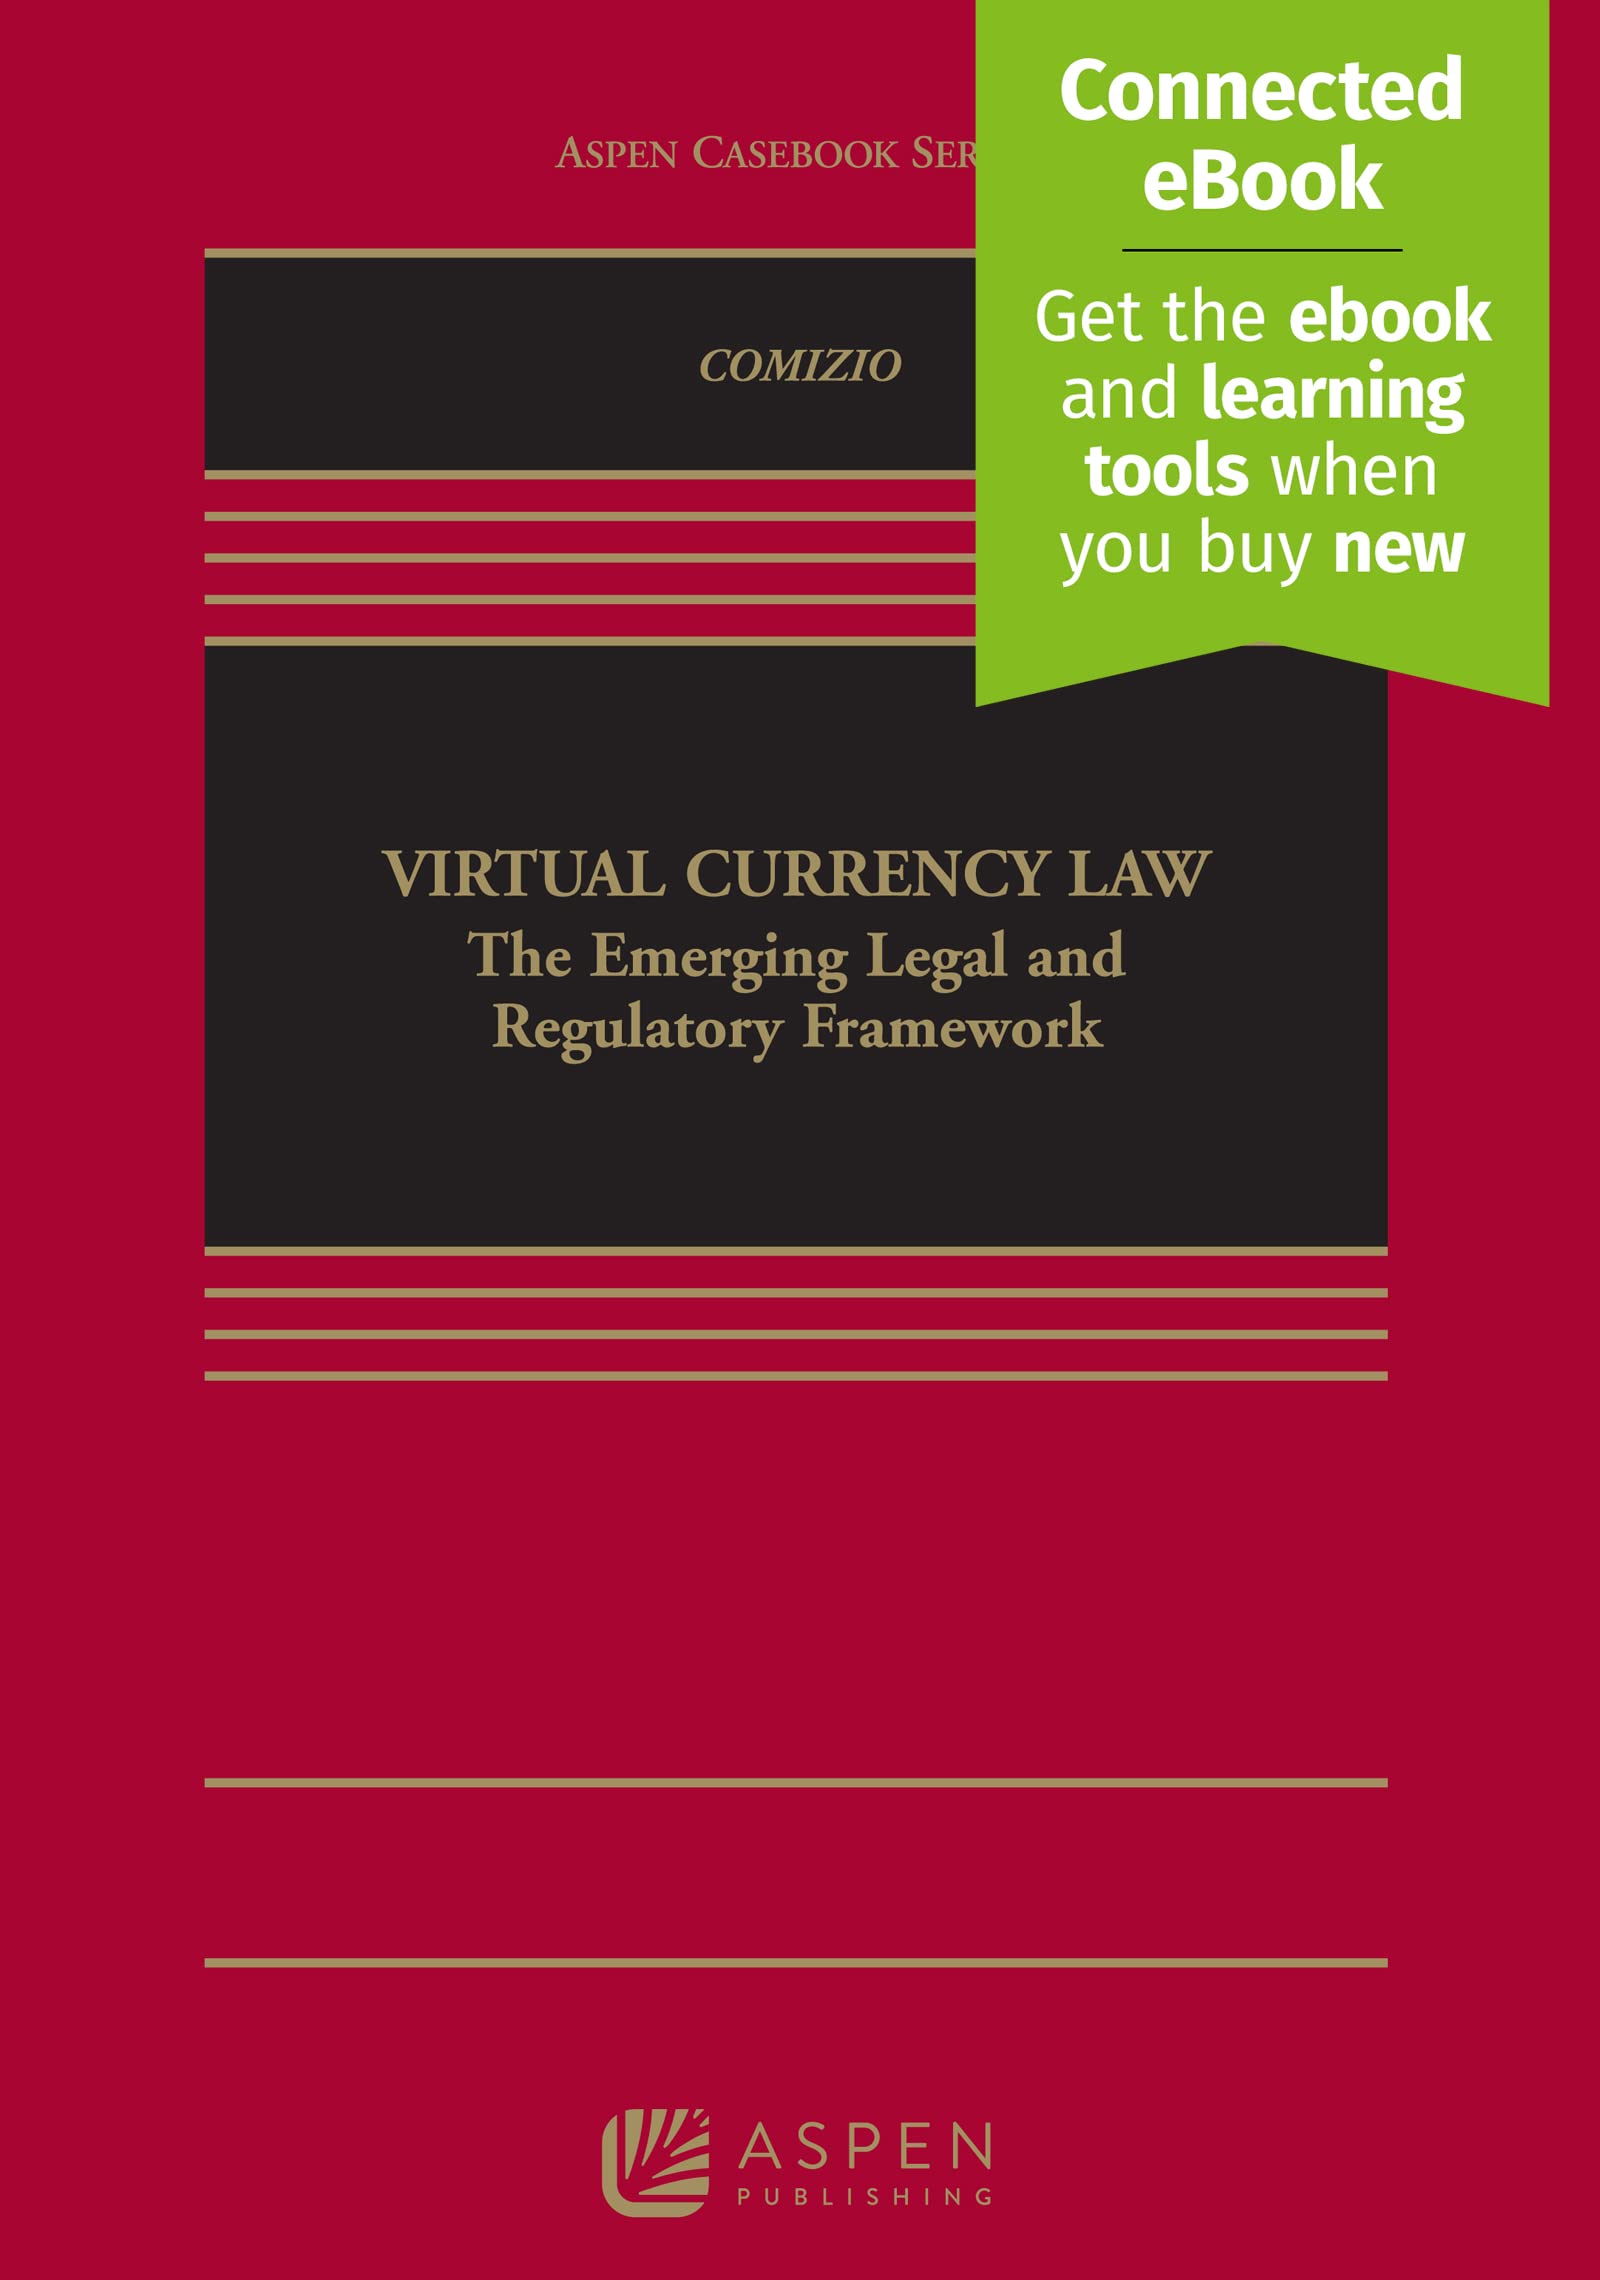 Virtual Currency Law: The Emerging Legal and Regulatory Framework [Connected eBook] (Aspen Casebook)